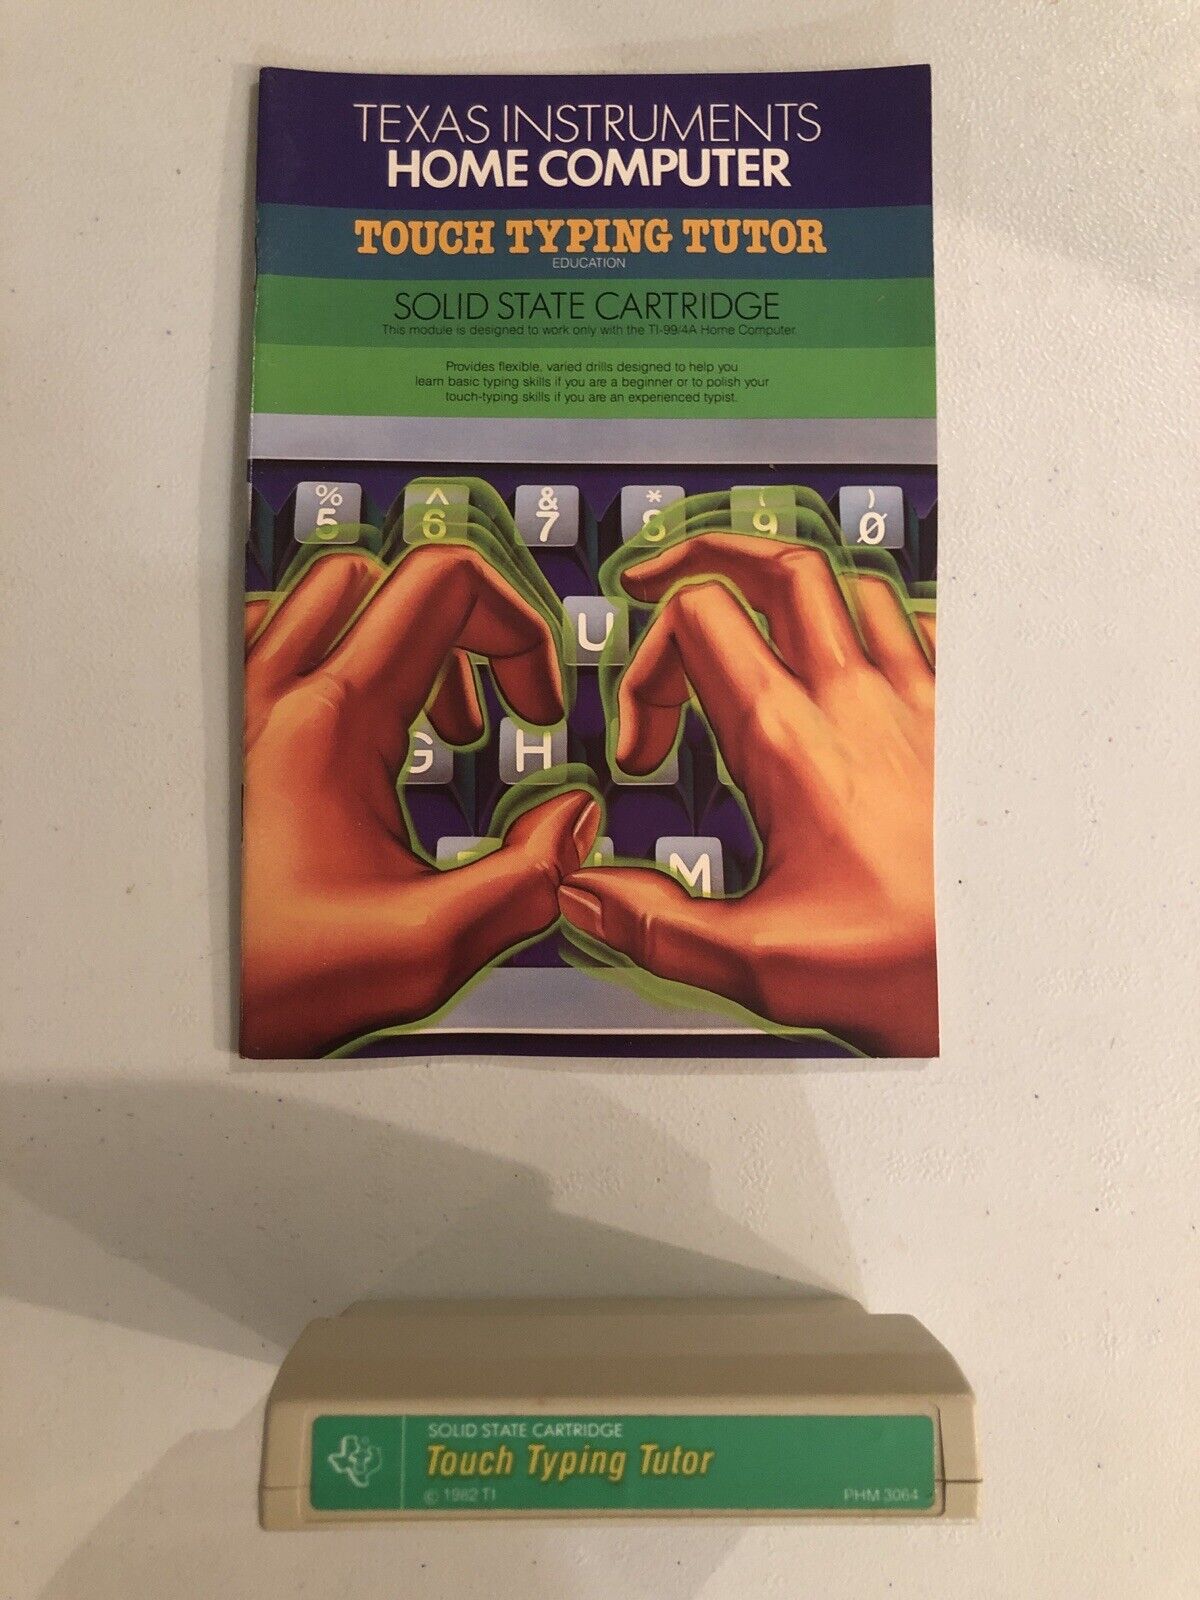 RARE VINTAGE Texas Instruments Touch Typing Tutor Video Game W Manual TI-99 4A